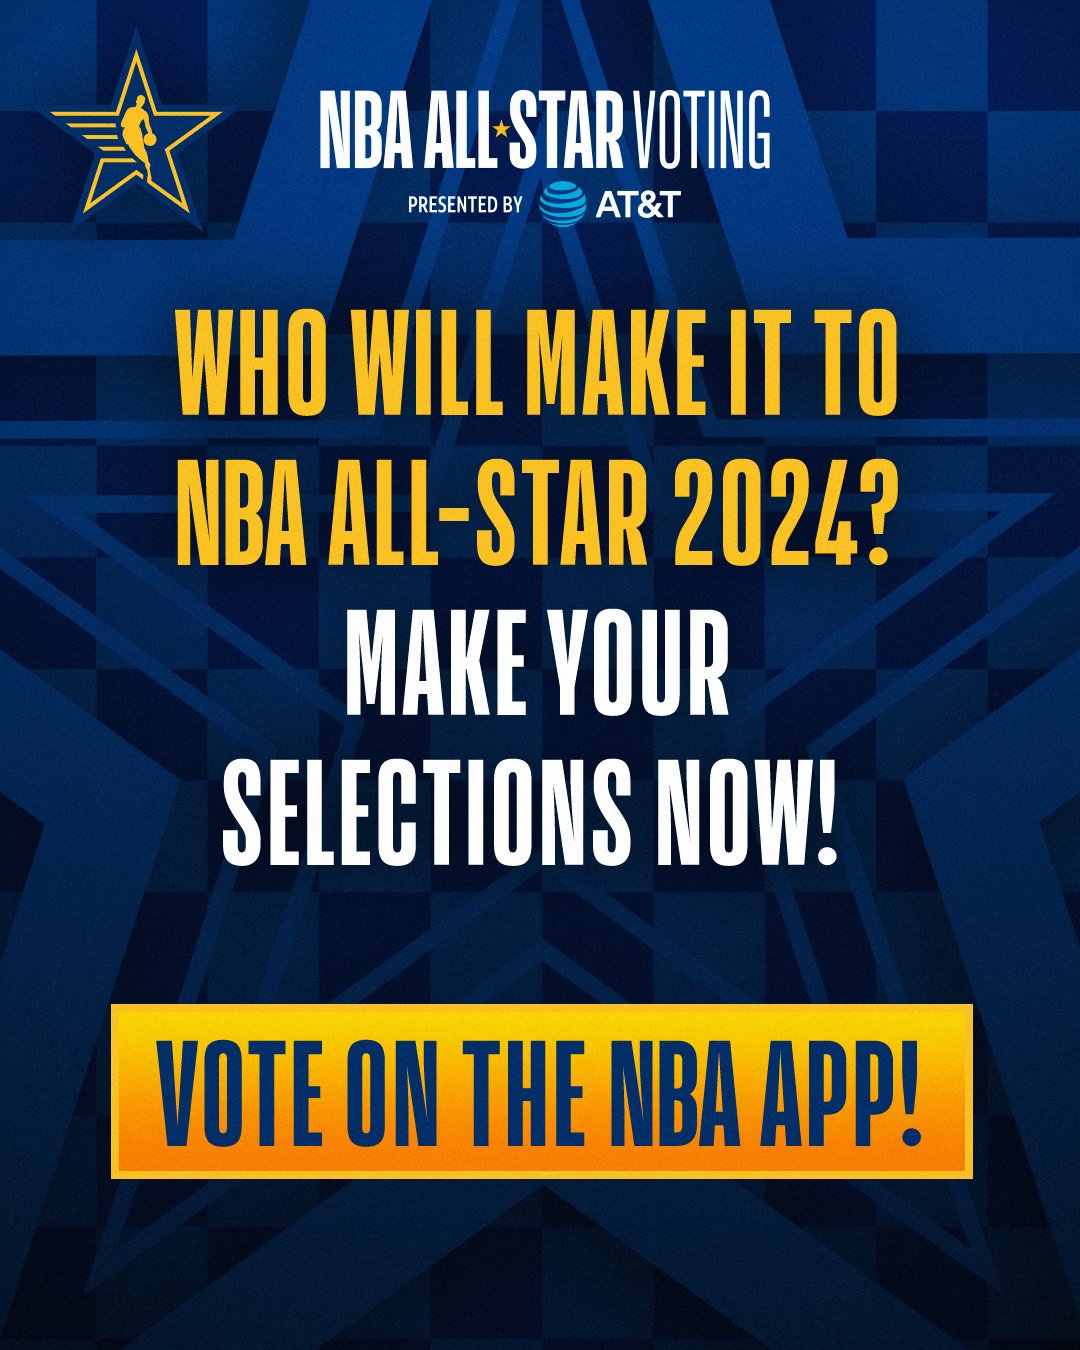 NBA All-Star 2024 Schedule of Events